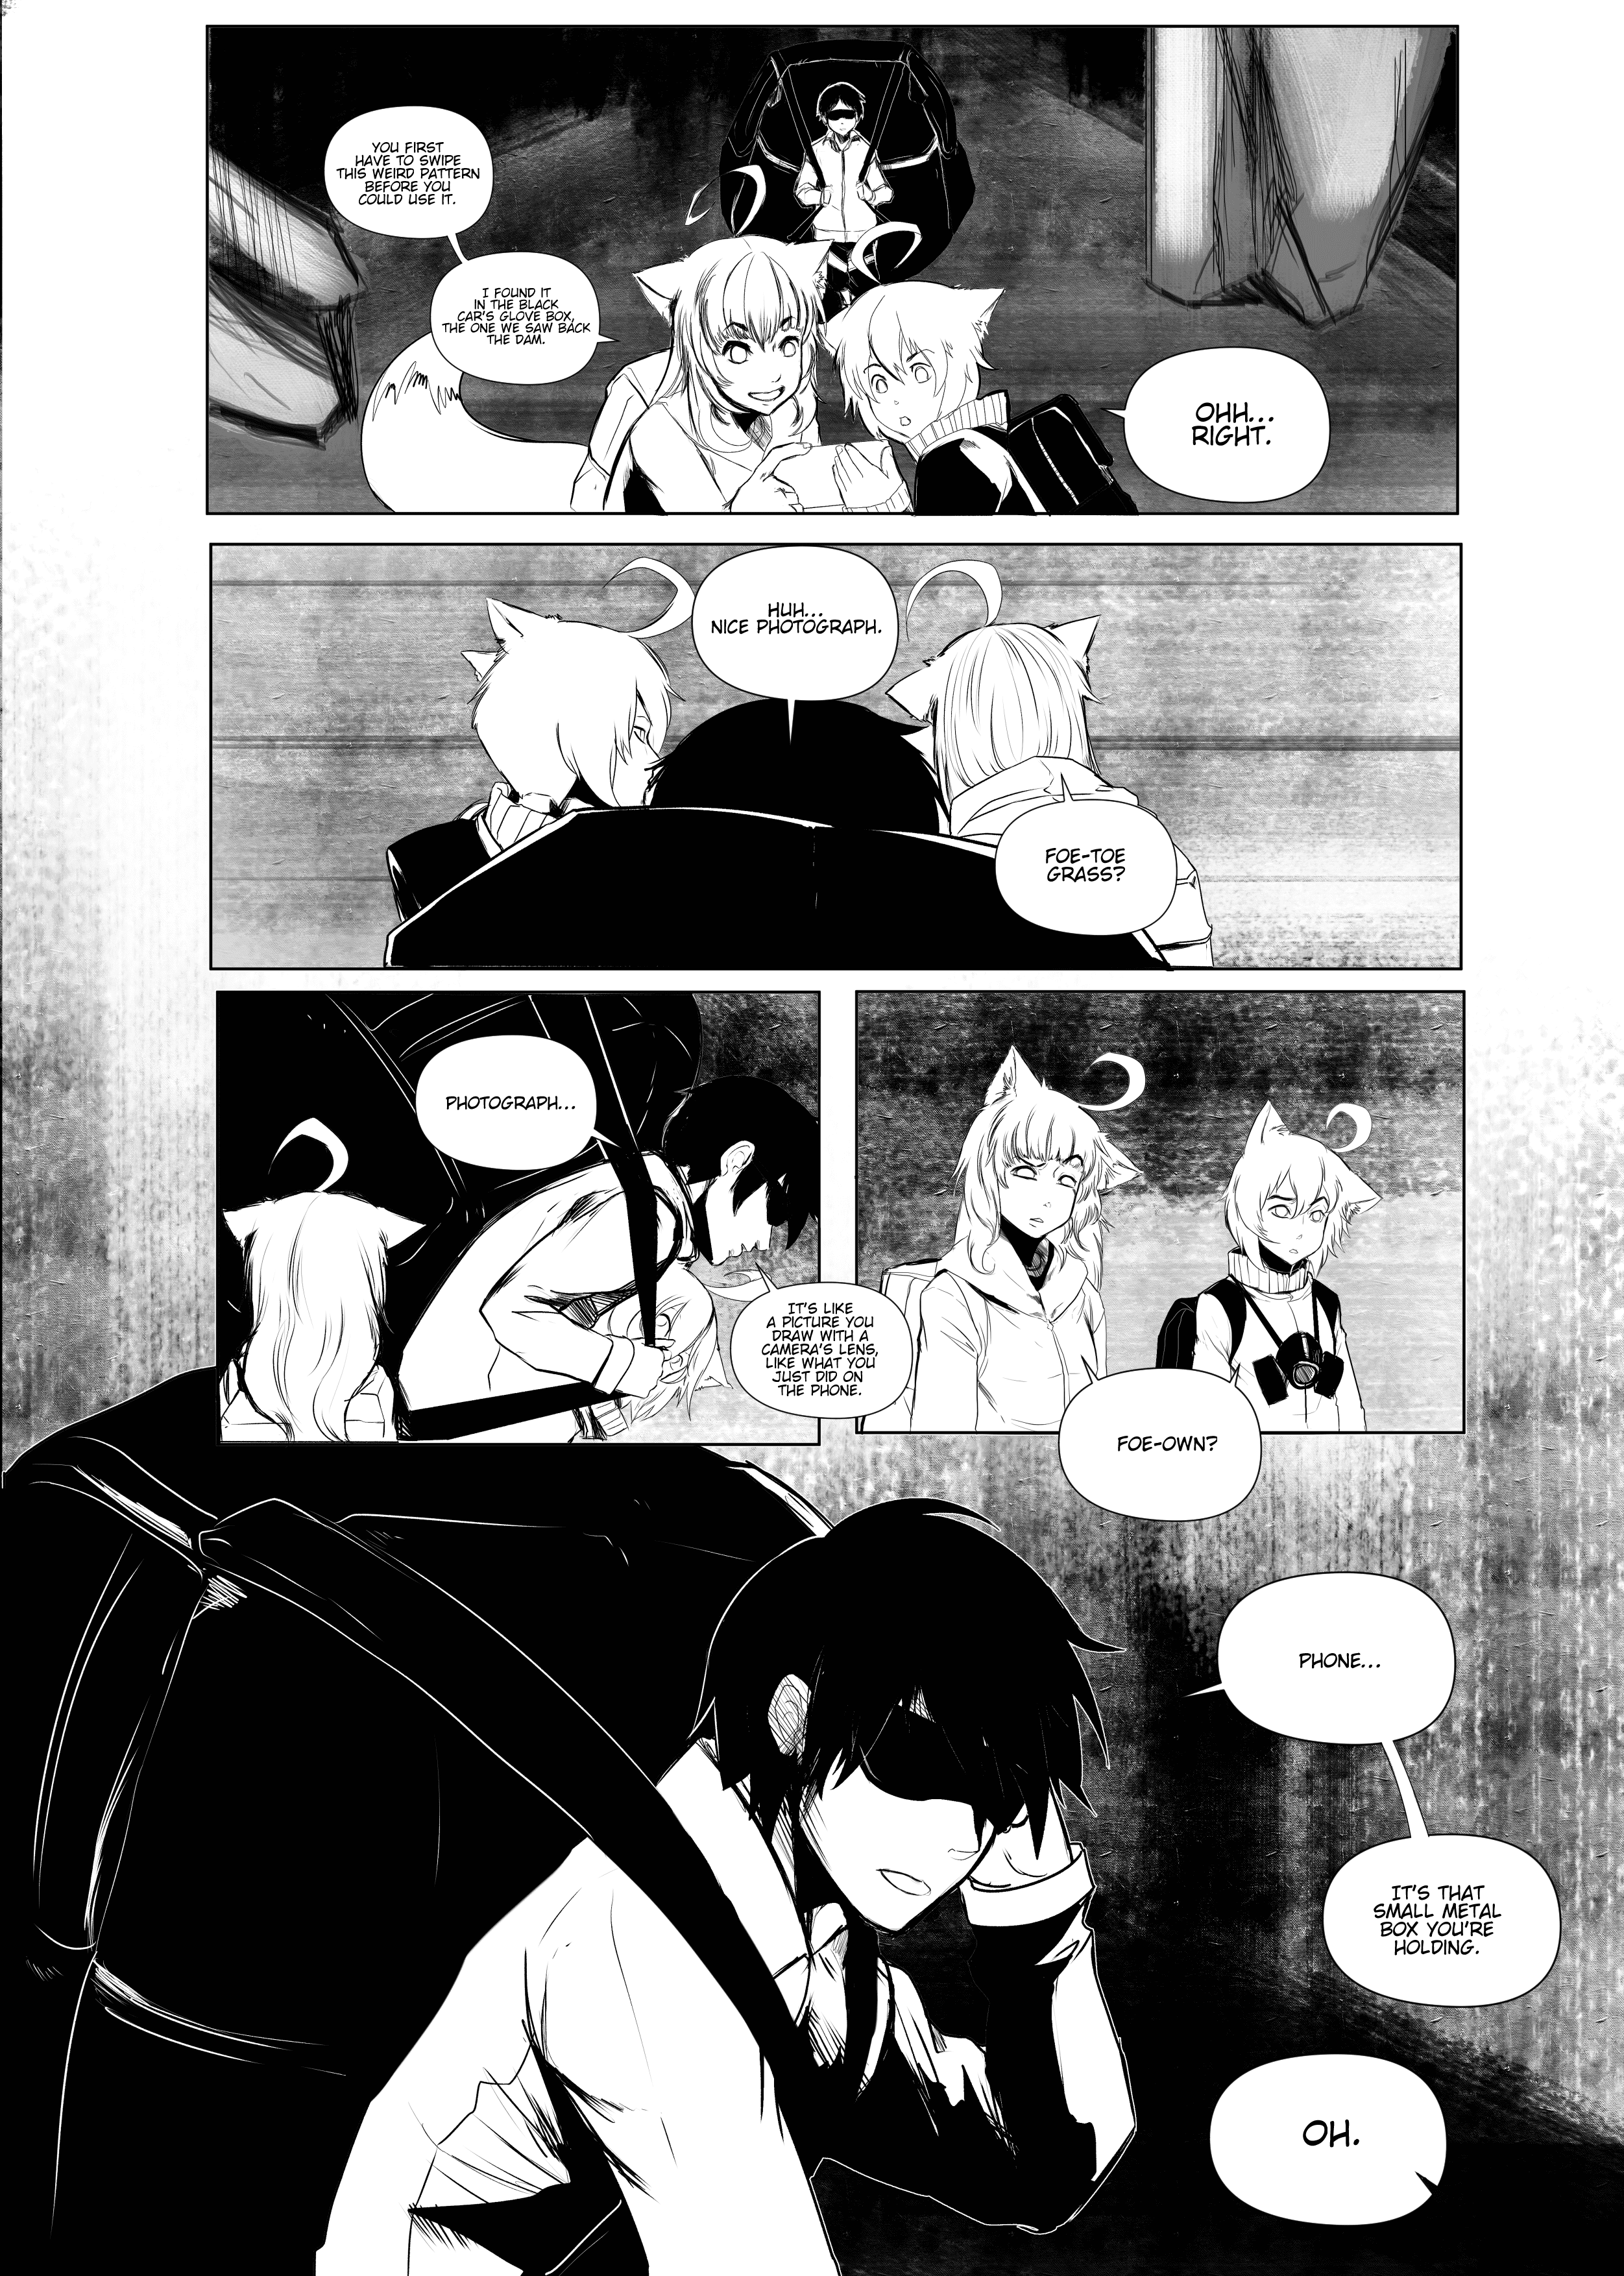 How We End - Page 5